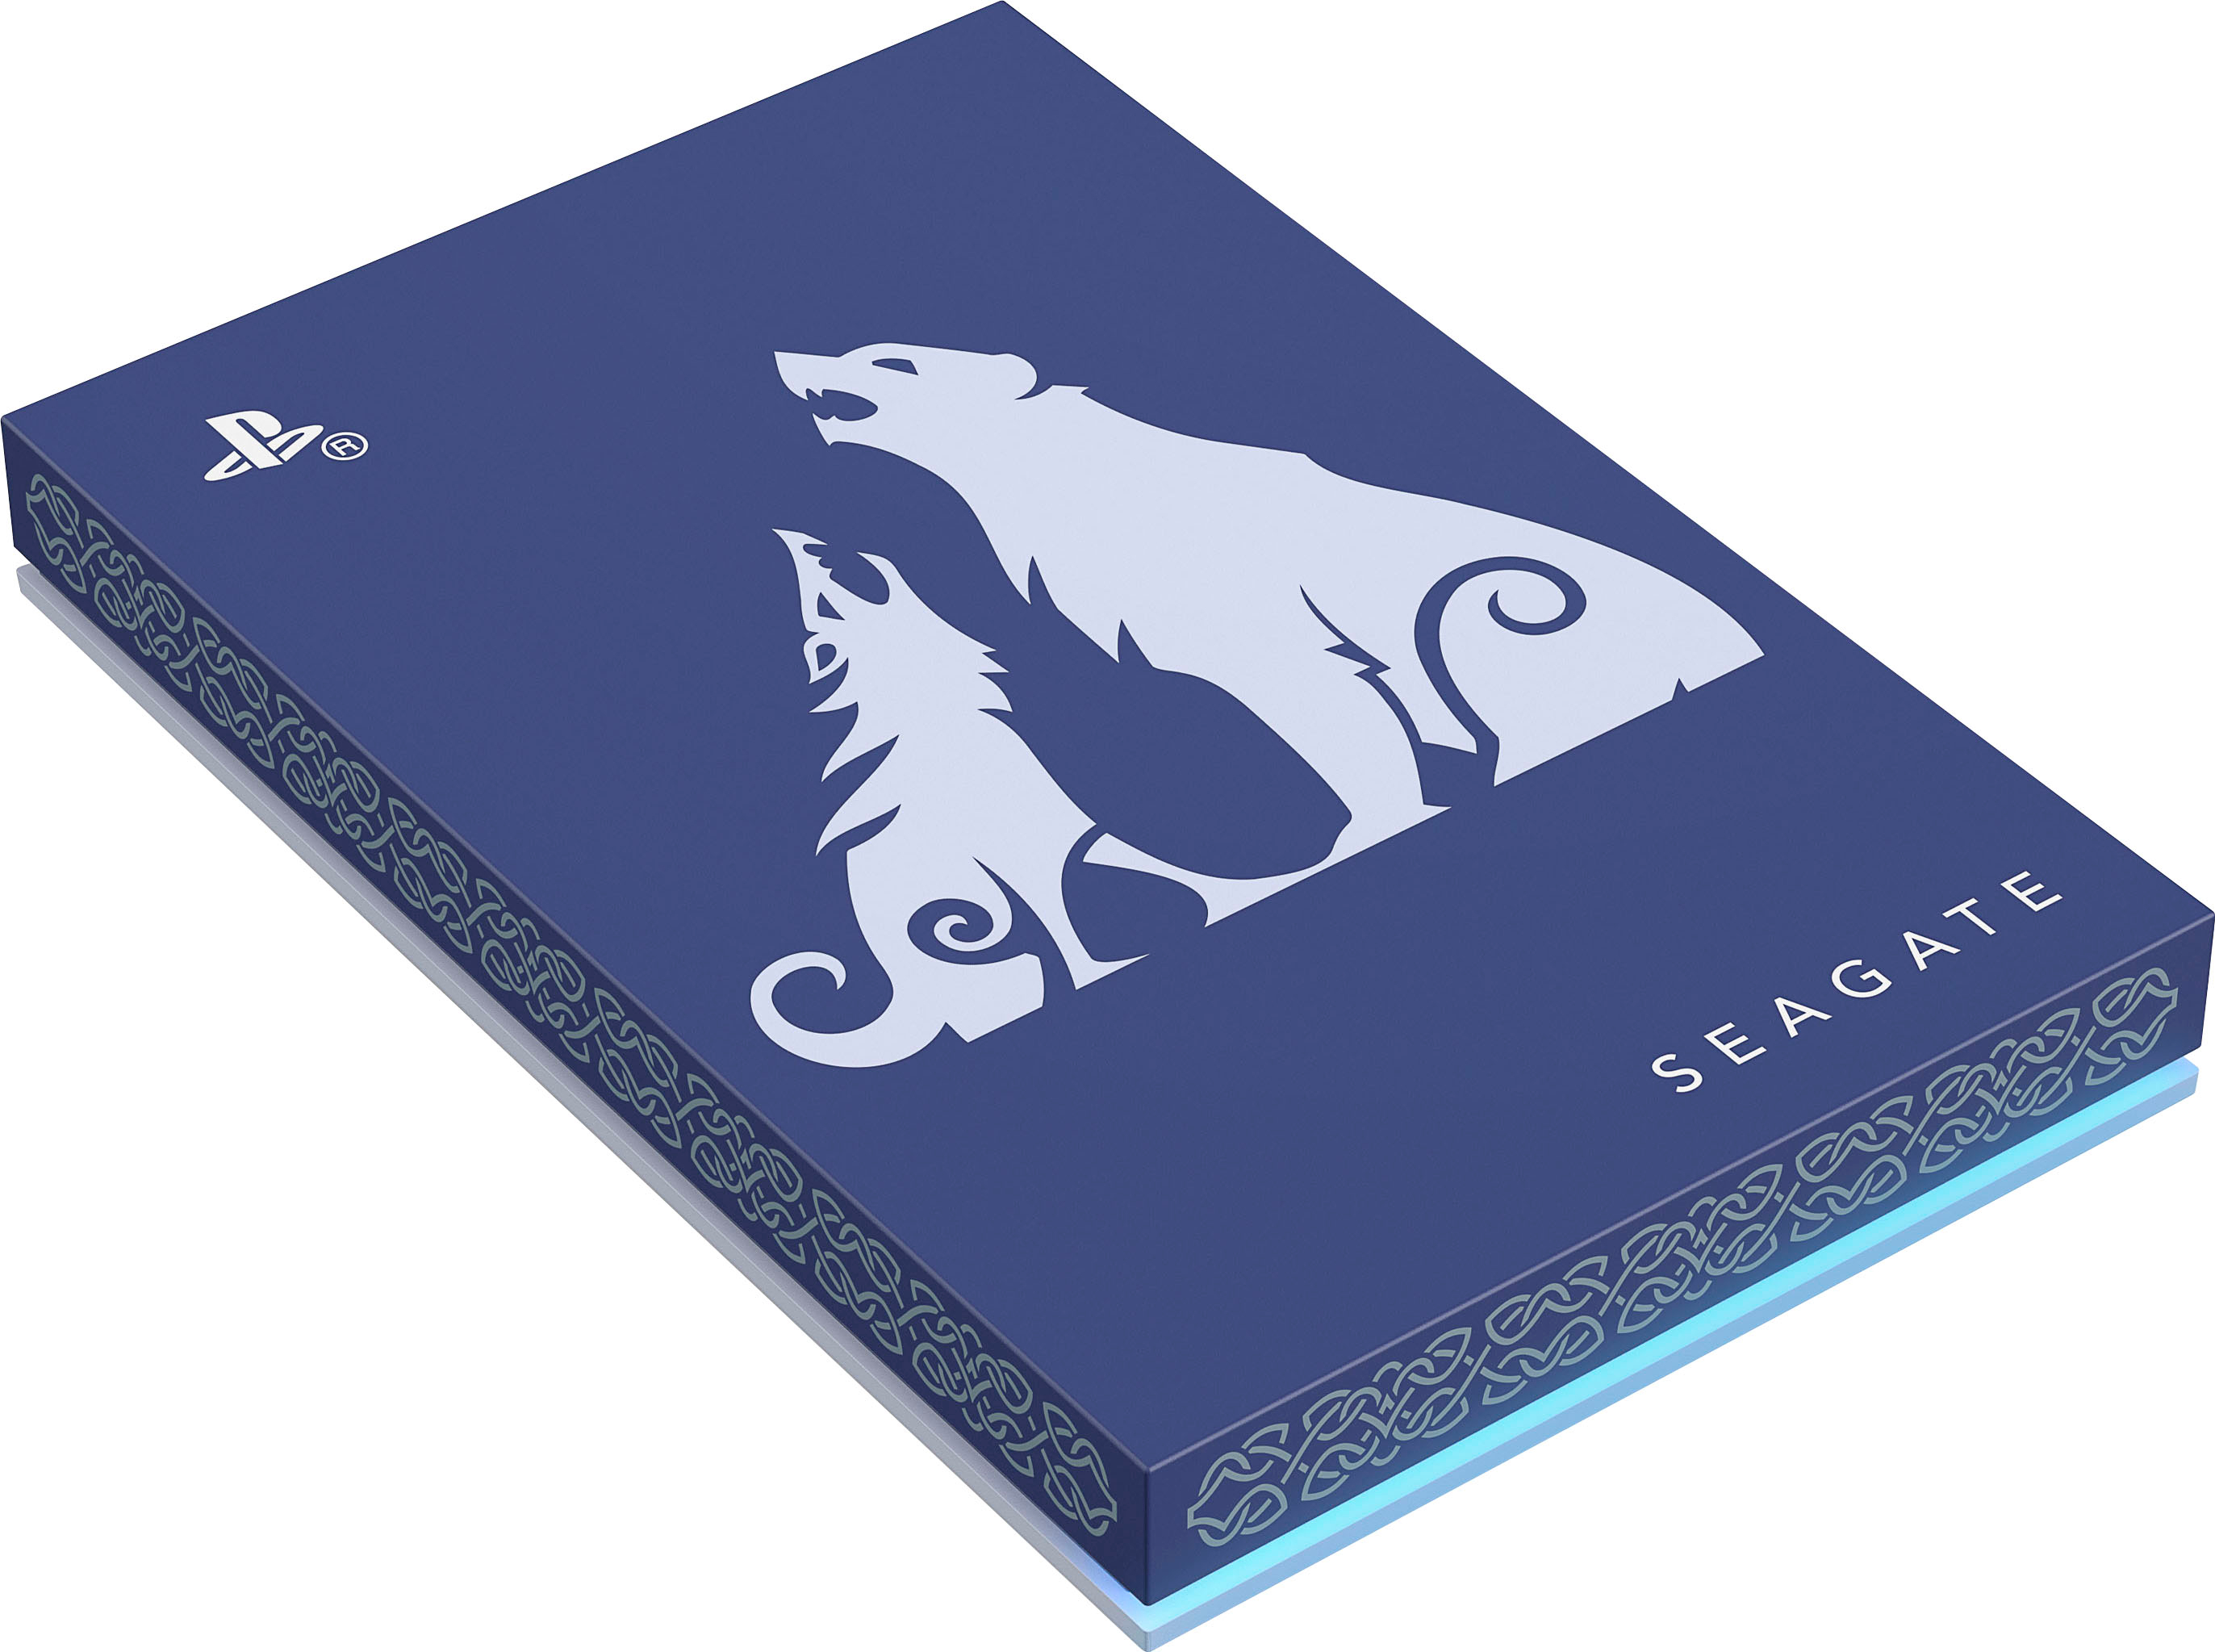 Storage: Seagate launches officially-licensed Game Drives for PS5